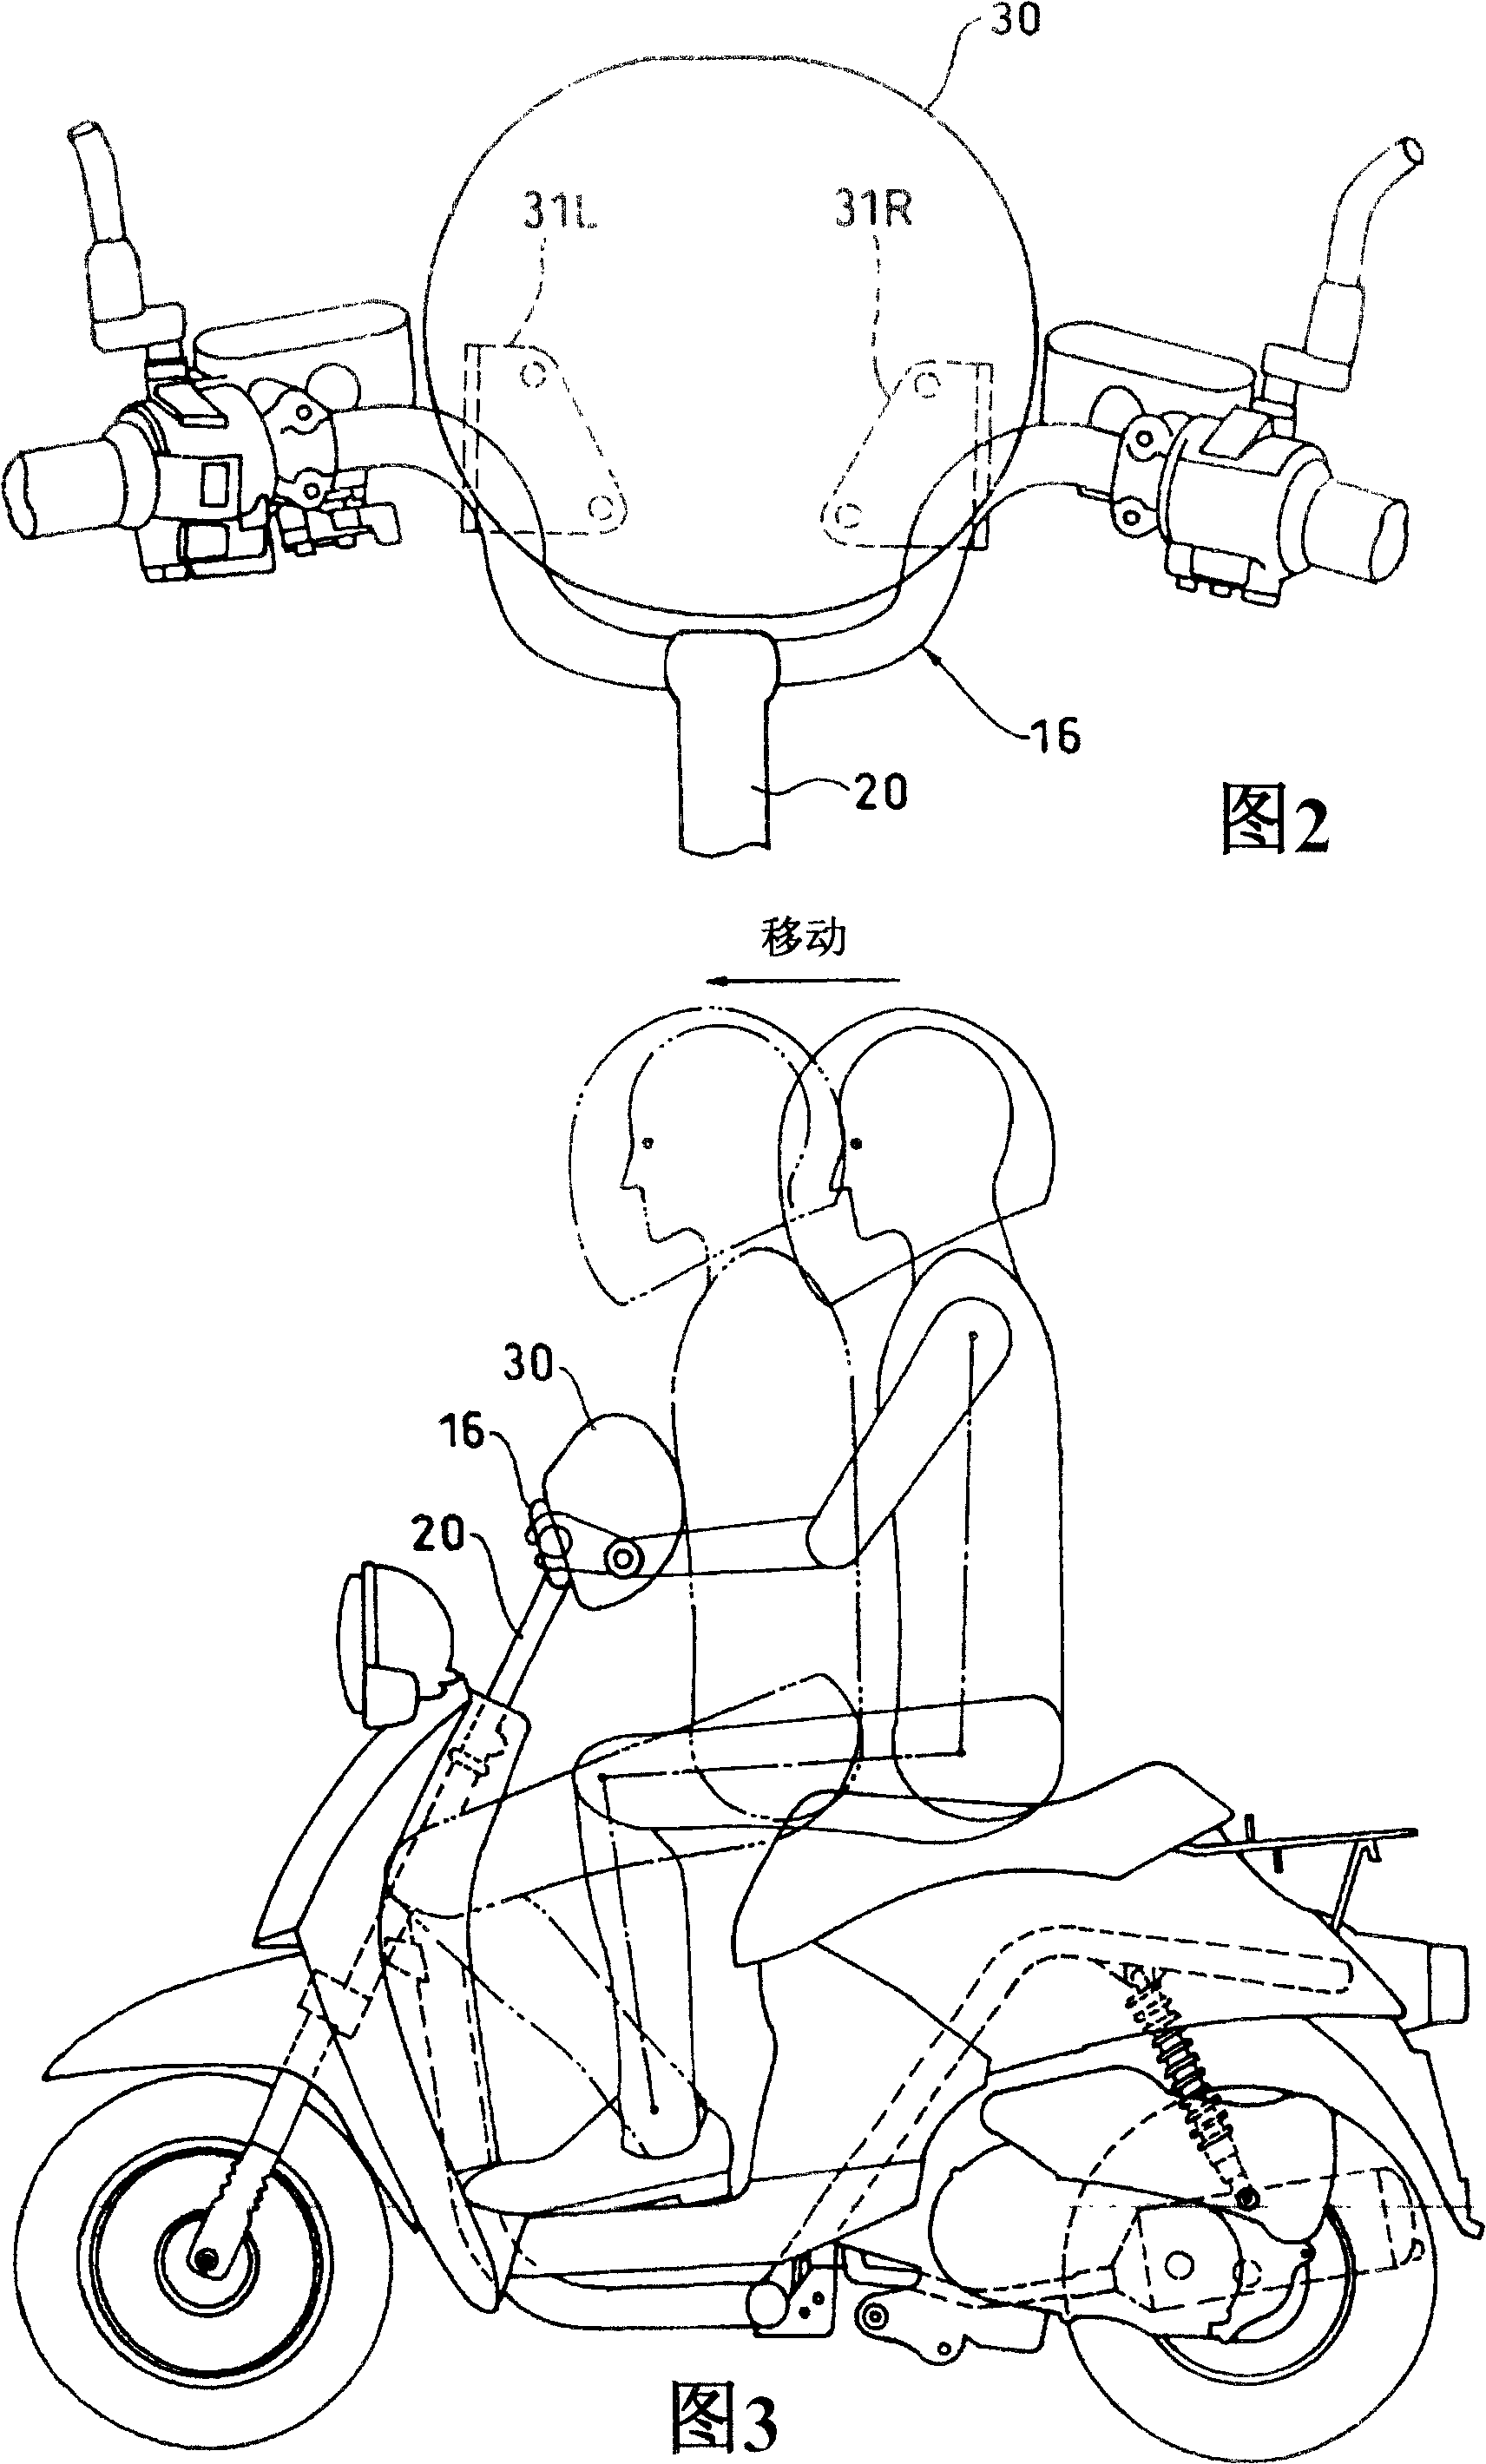 Occupant restraining device for two-wheel vehicle